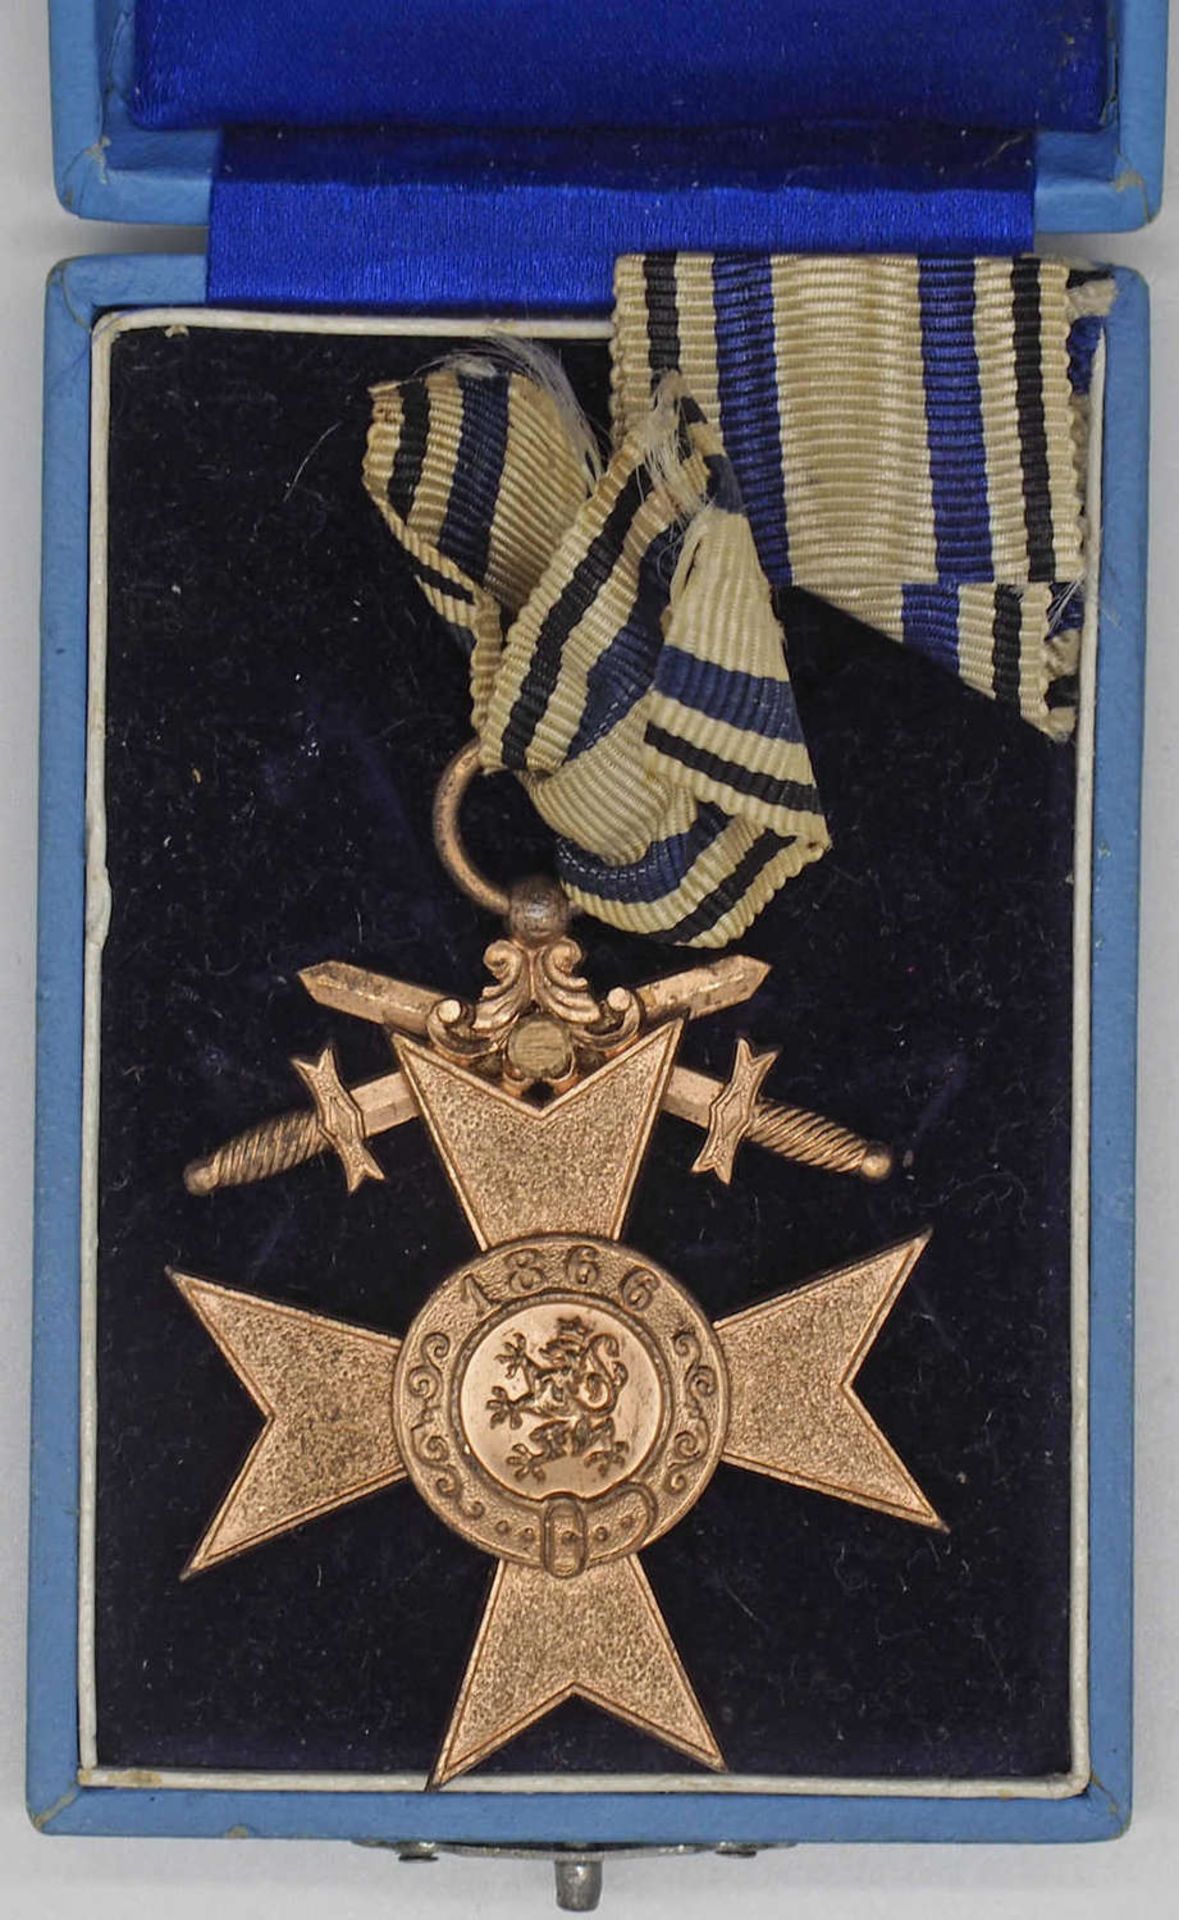 Bayr. Military Merit Cross 3rd class with swords. In the original case.